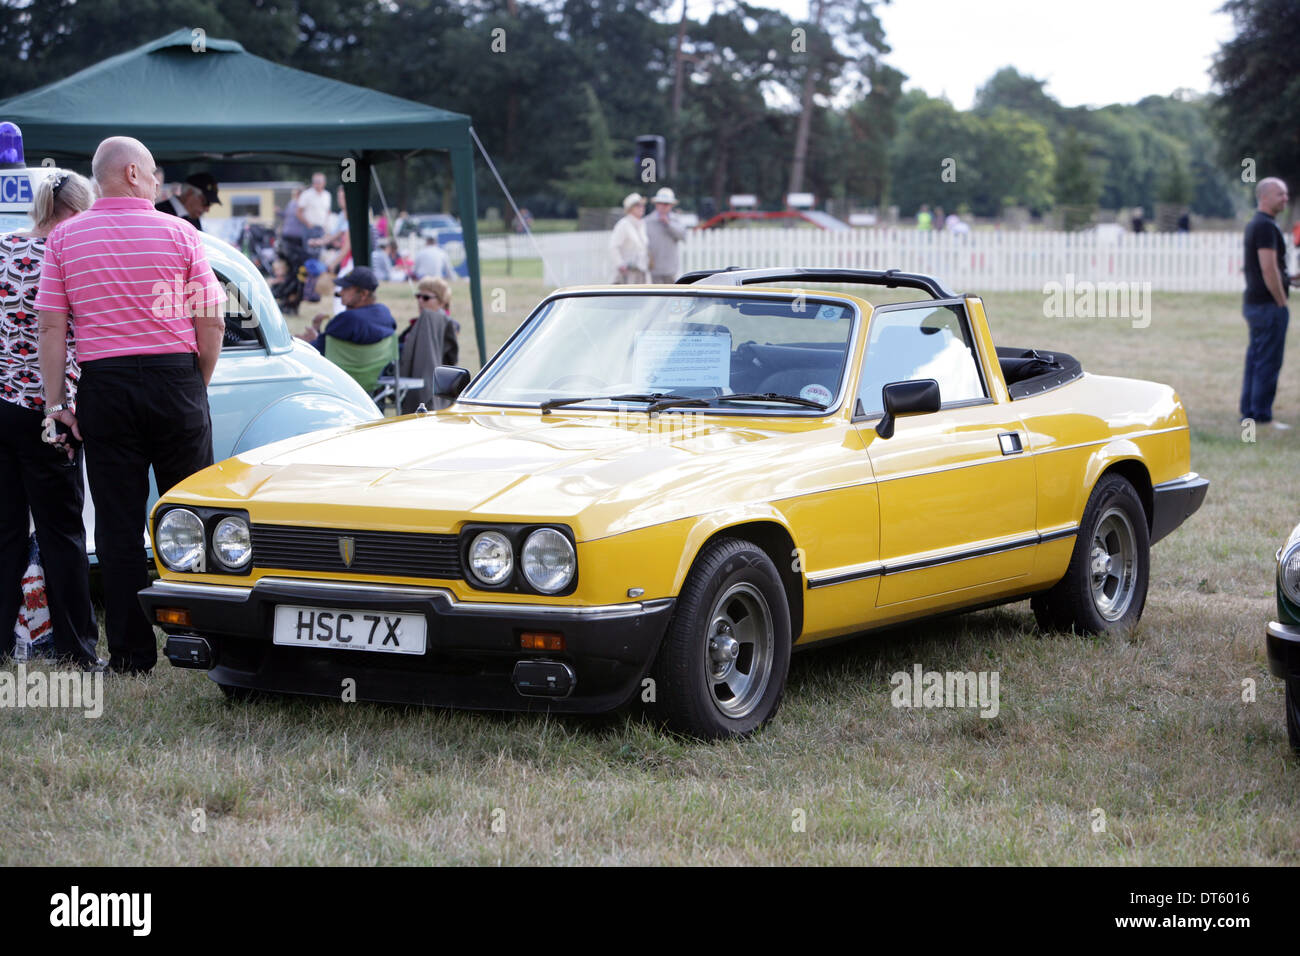 A rare 1981 Reliant Scimitar GTC British-built sportscar. One of only 442 cars made. Reliant was a favourite of UK Royalty. Stock Photo